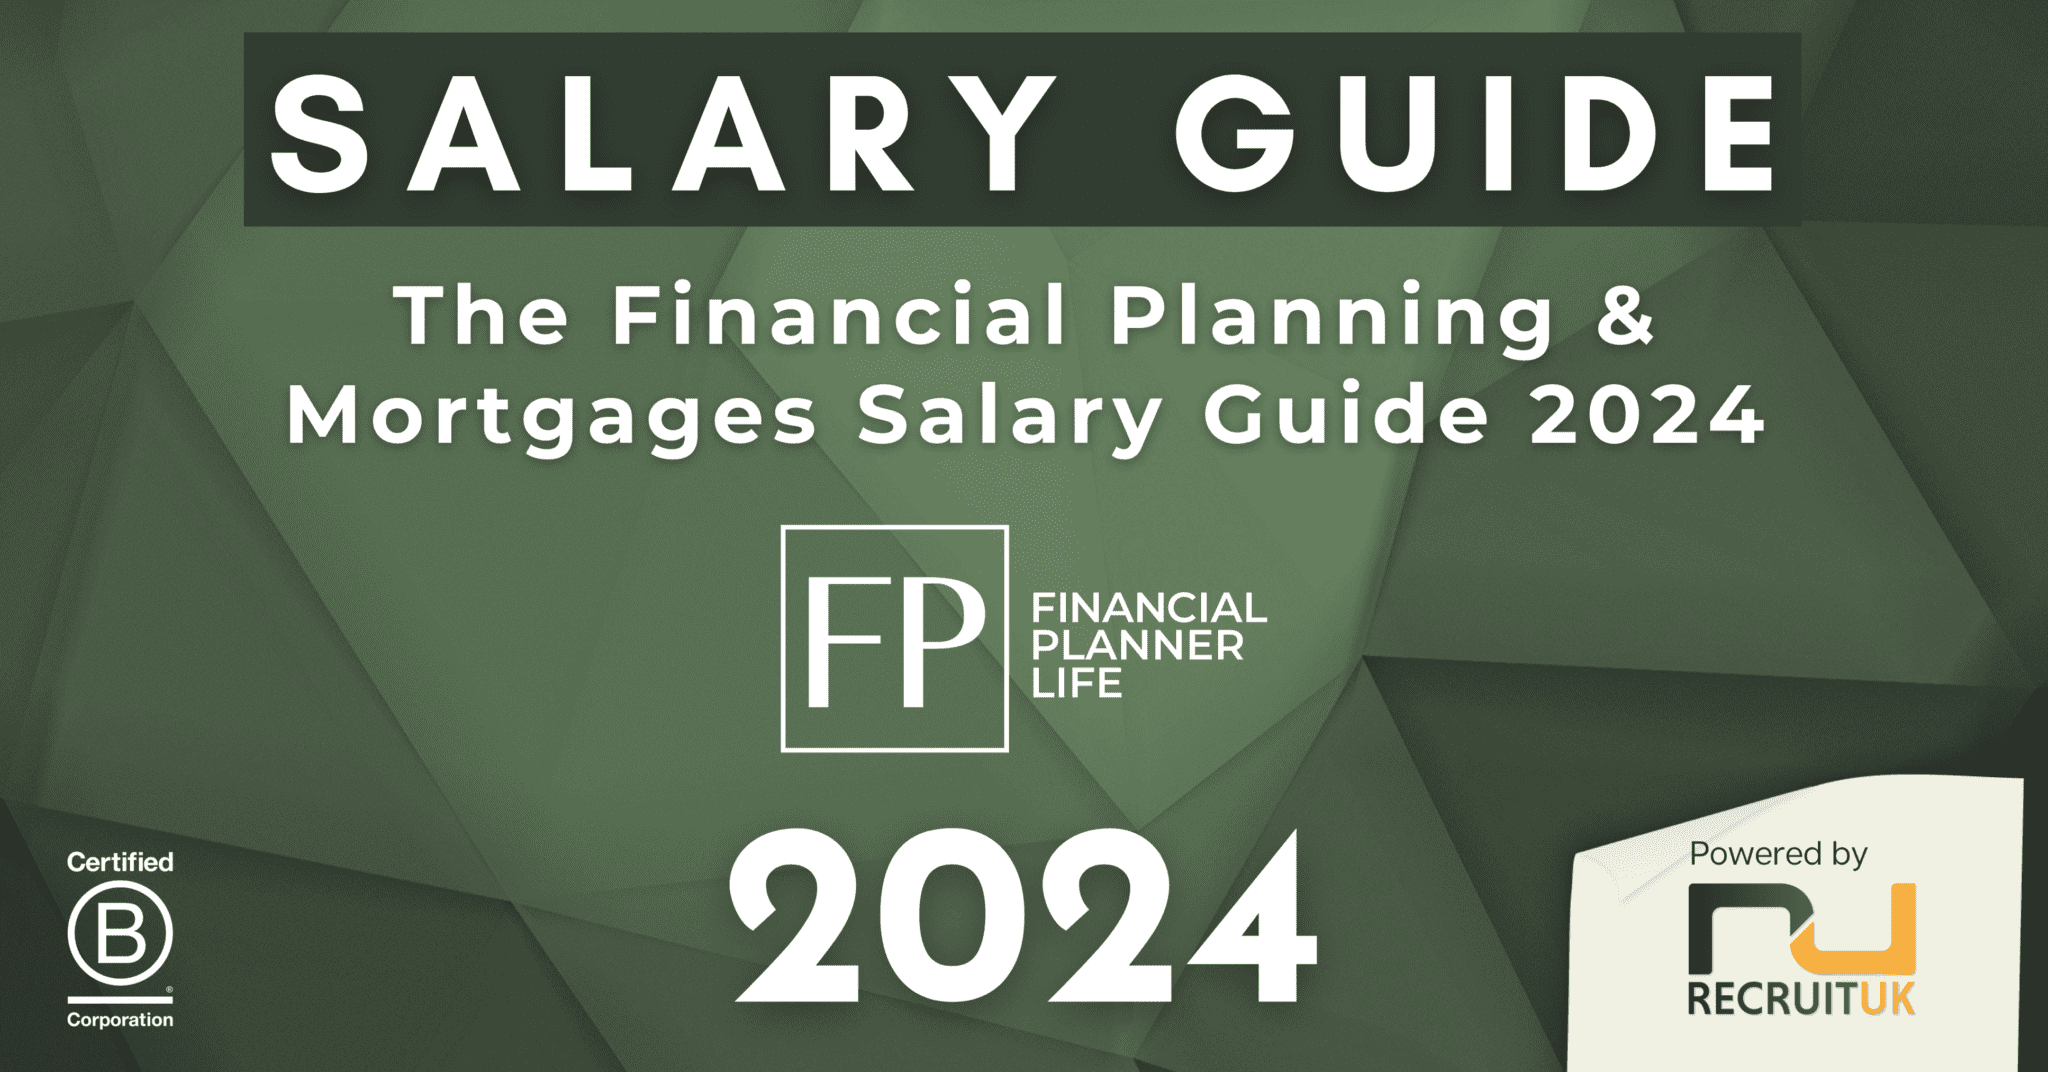 Discover Your Worth: Financial Planner Life 2024 Salary Guide